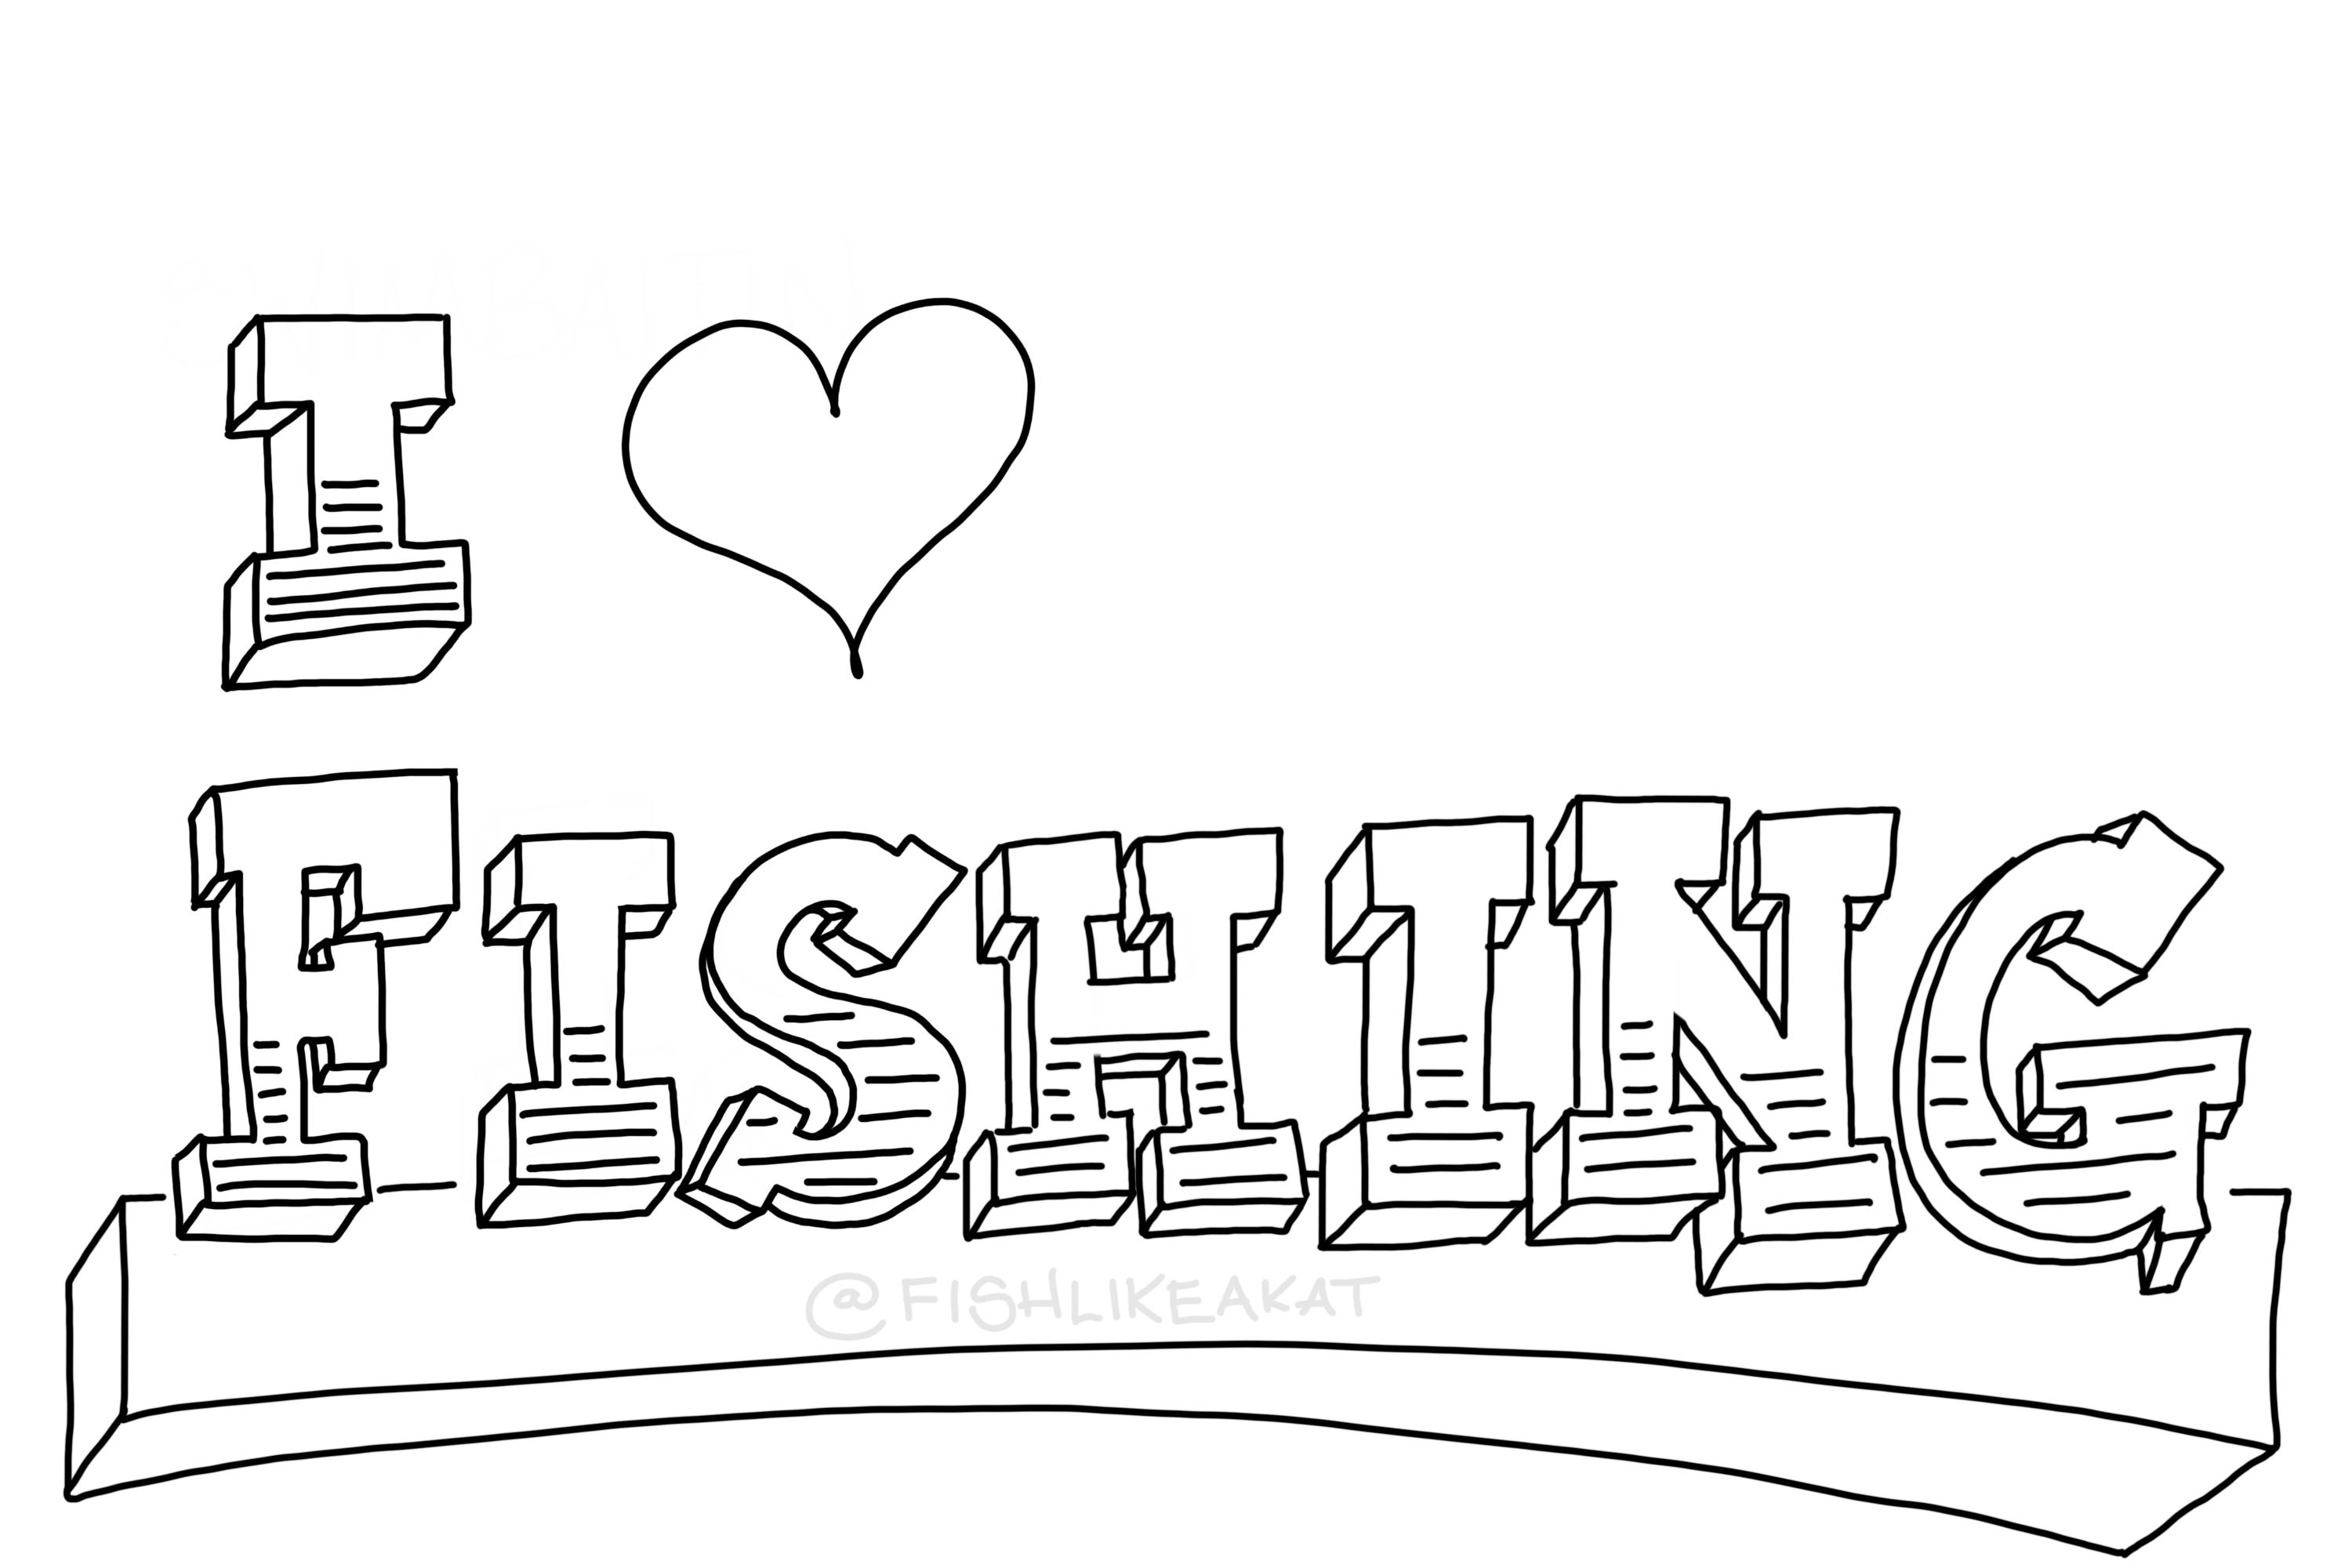 Coloring page with text: I love fishing